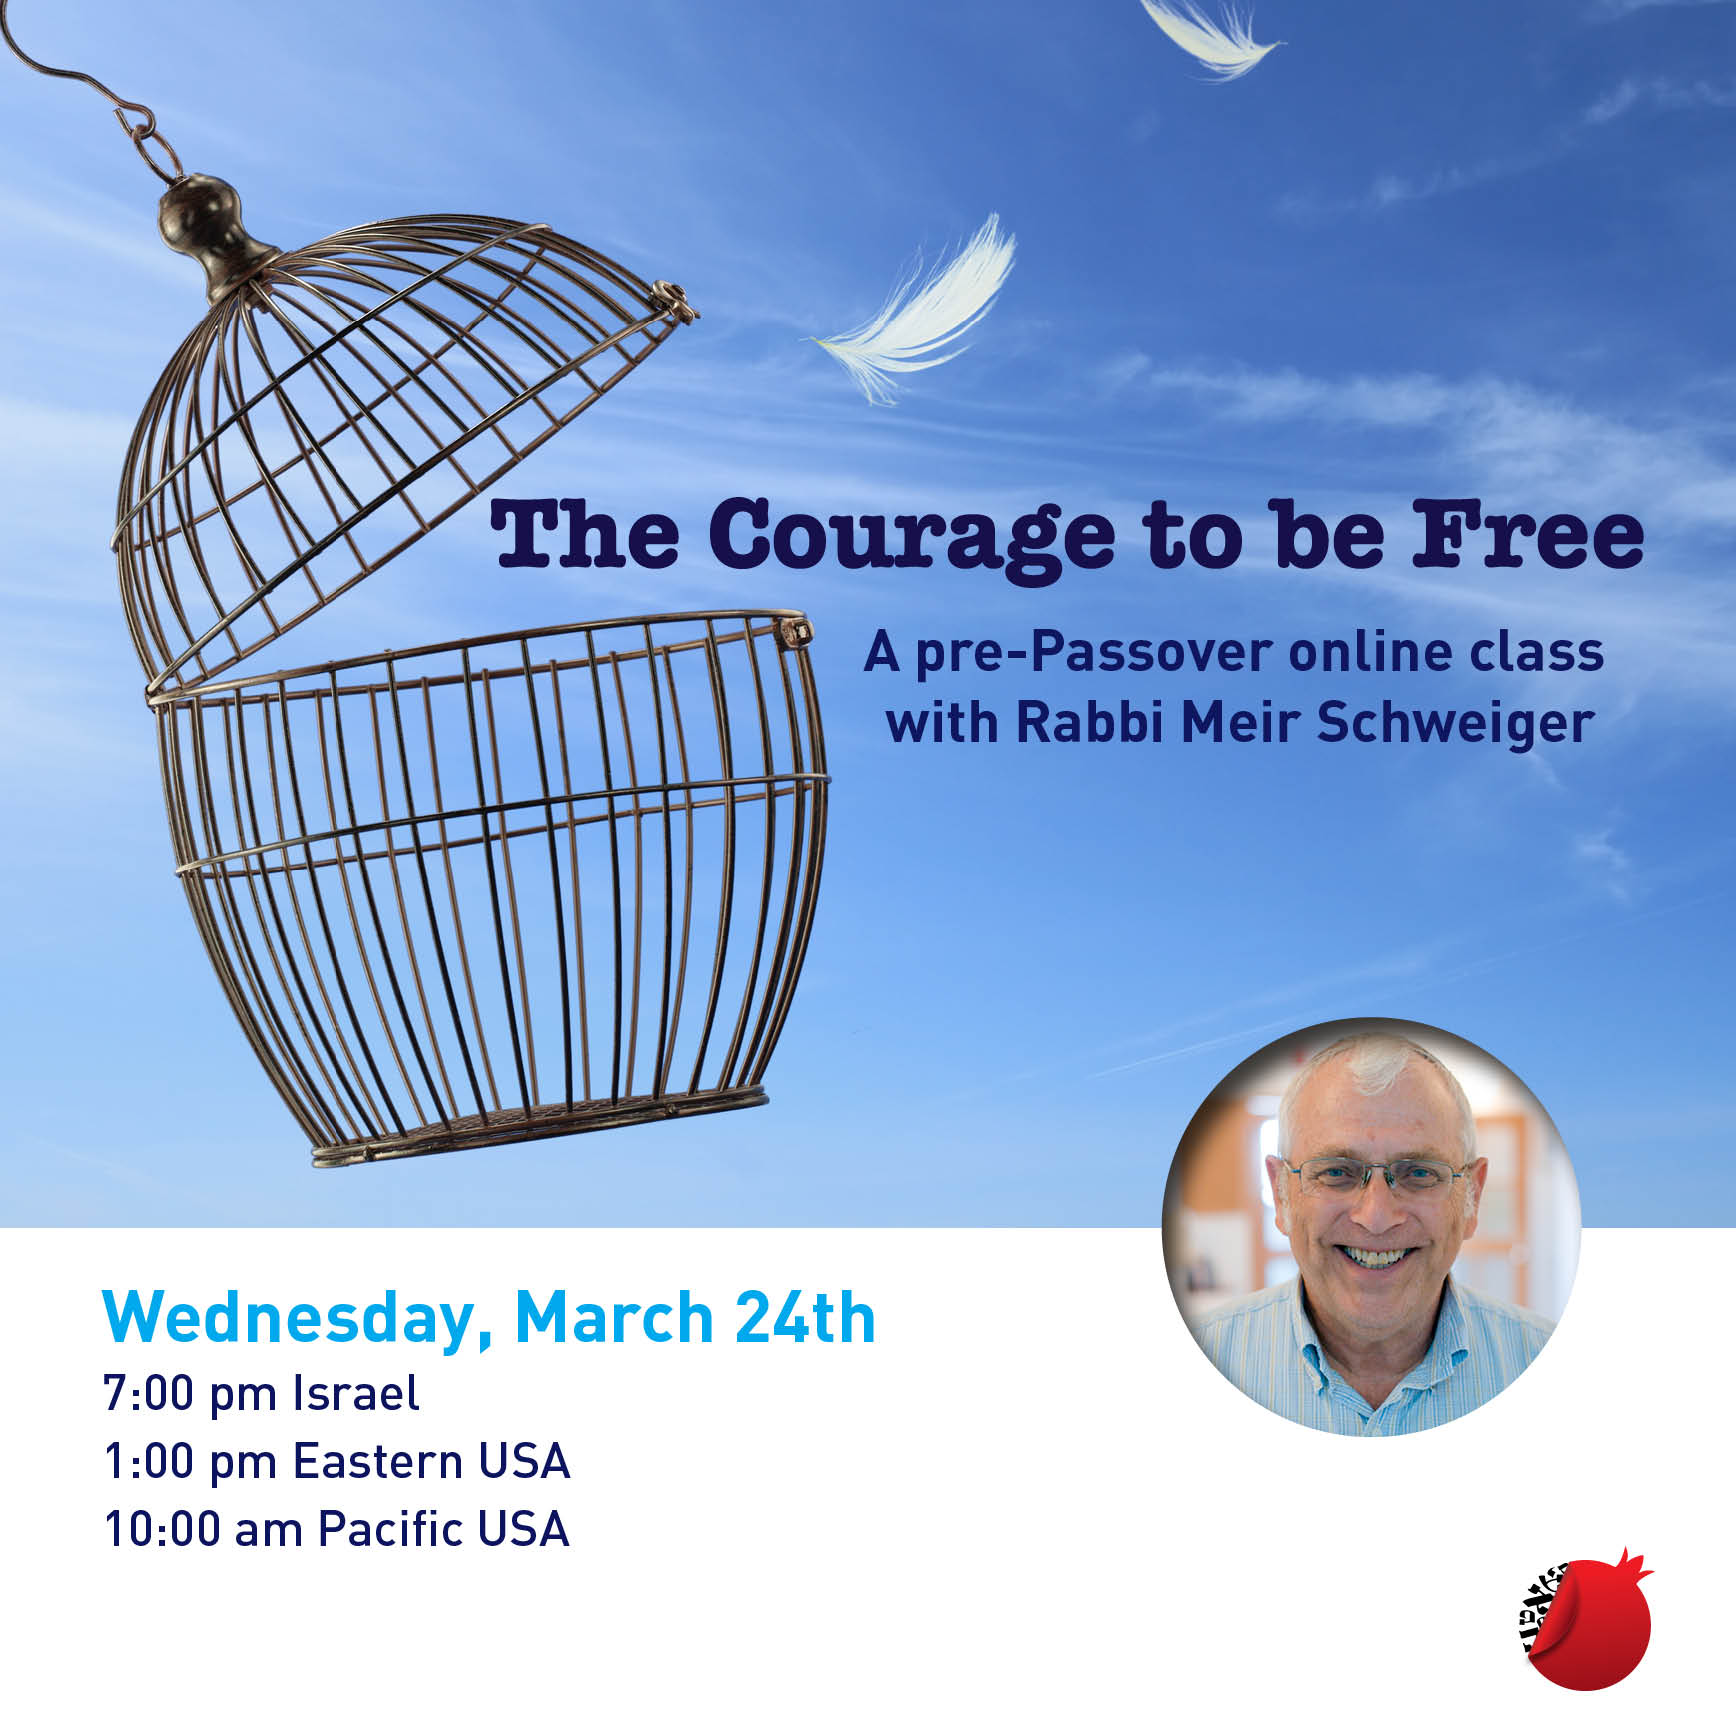 The Courage to be Free - A pre-Passover online class with Rabbi Meir Schweiger